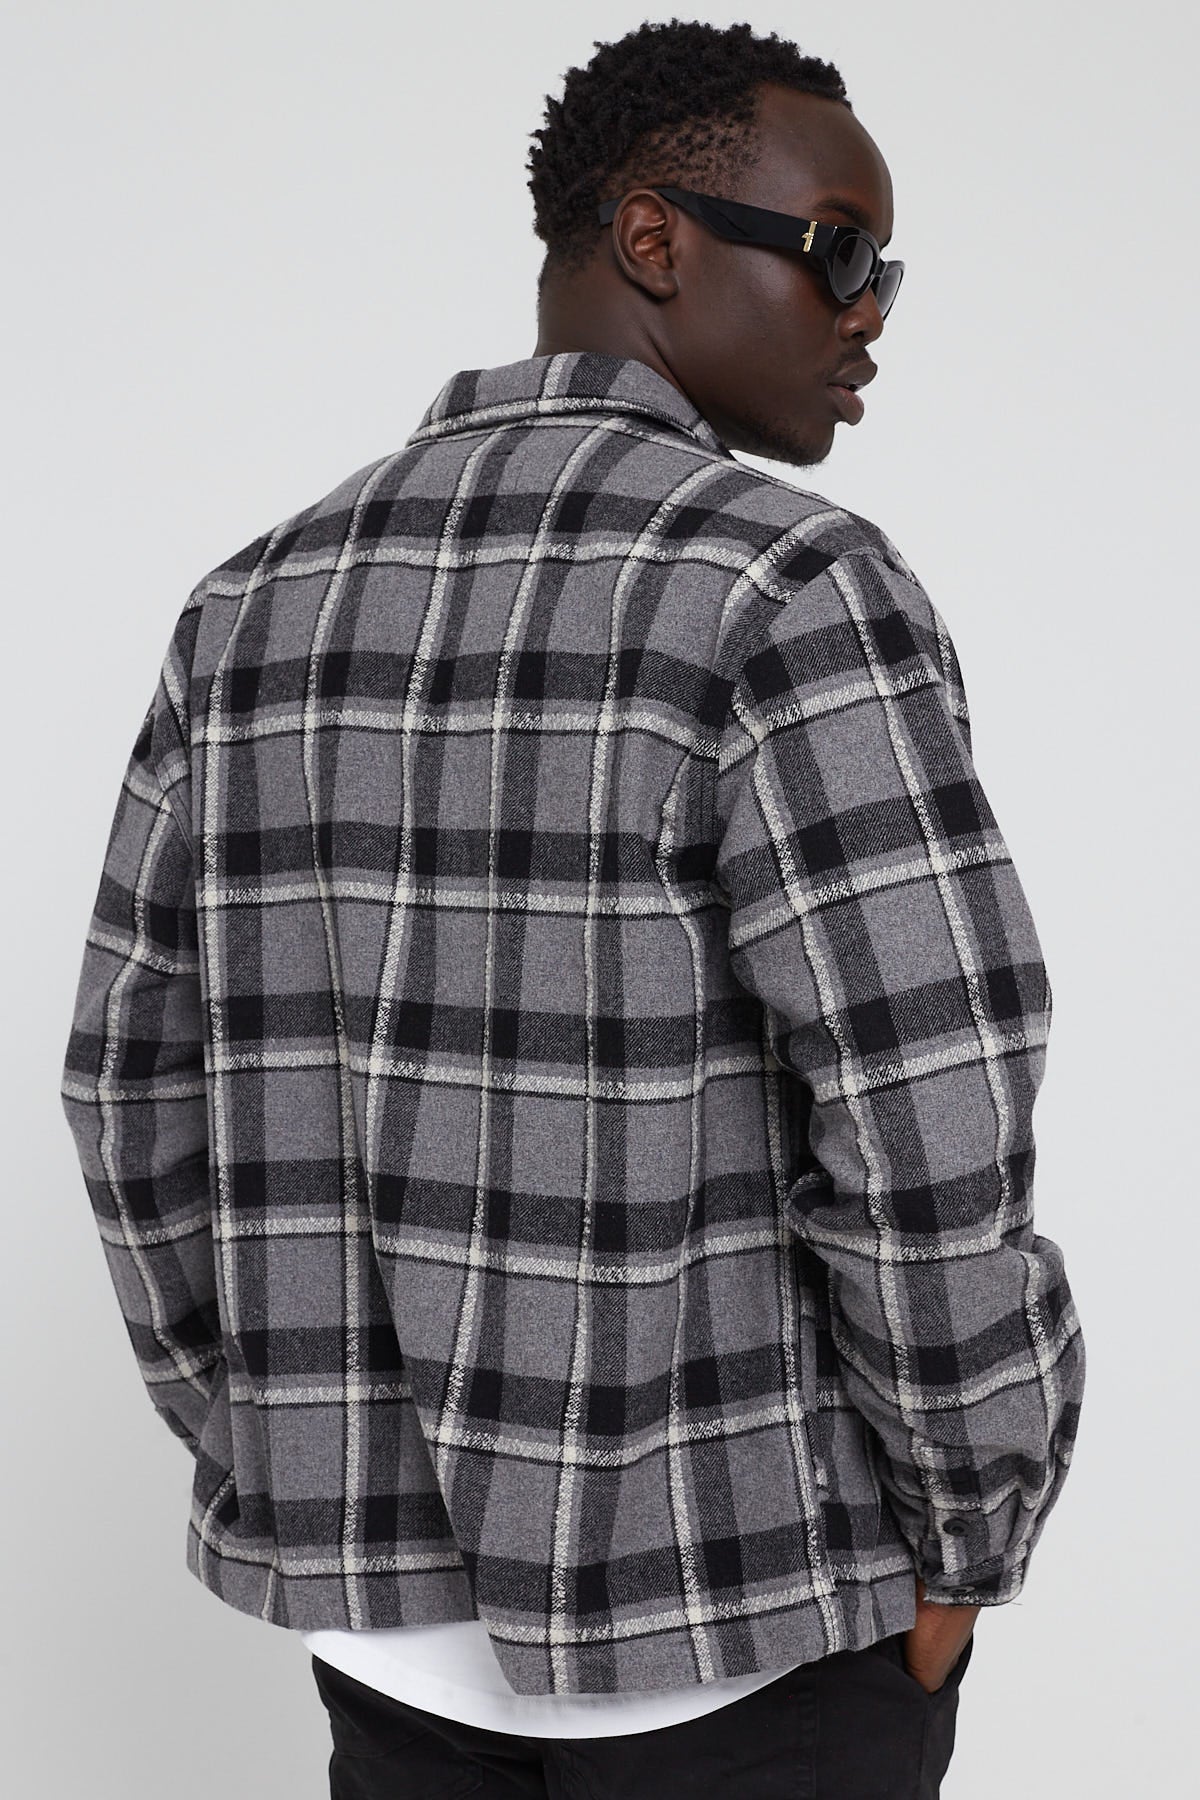 Kiss Chacey Ruskin Relaxed Overshirt Charcoal Check